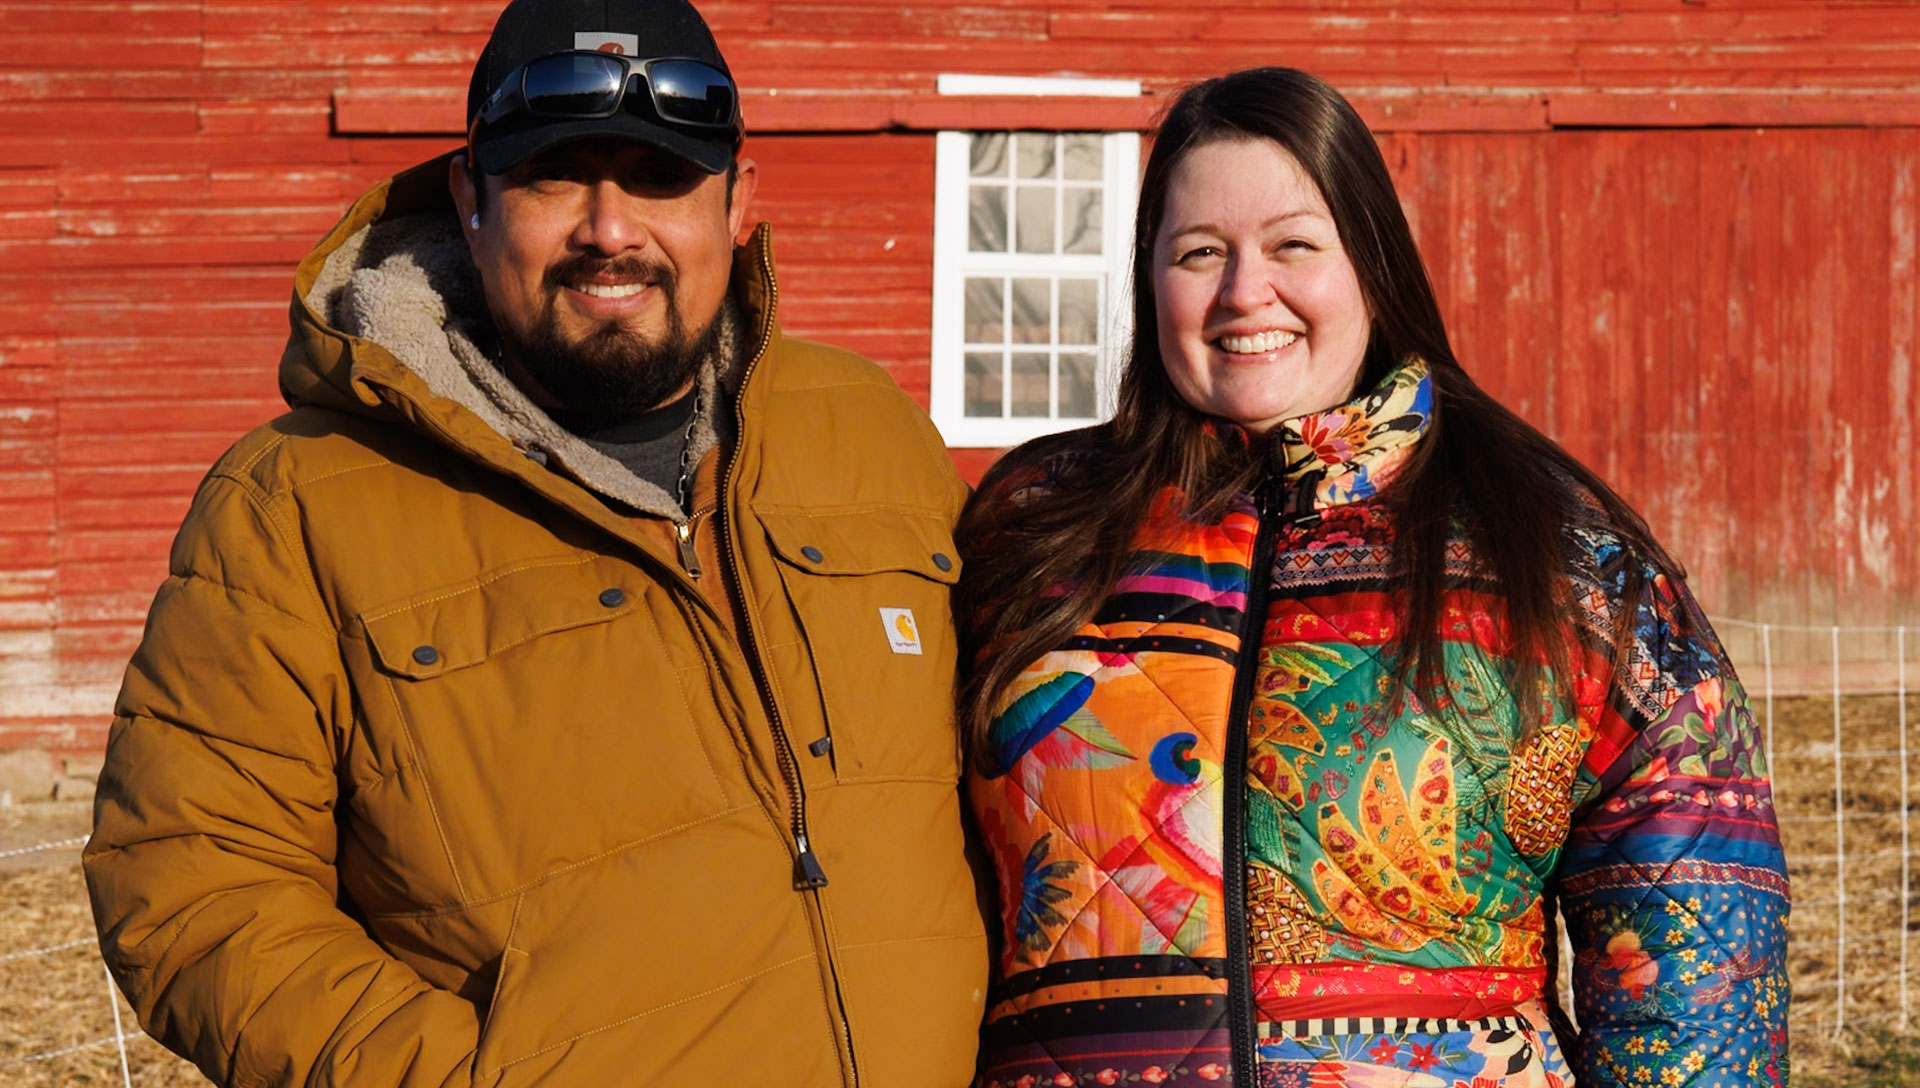 Damian Rivera and Rosemary Linares, co-owners of Damian’s Craft Meats in Ann Arbor, Michigan.